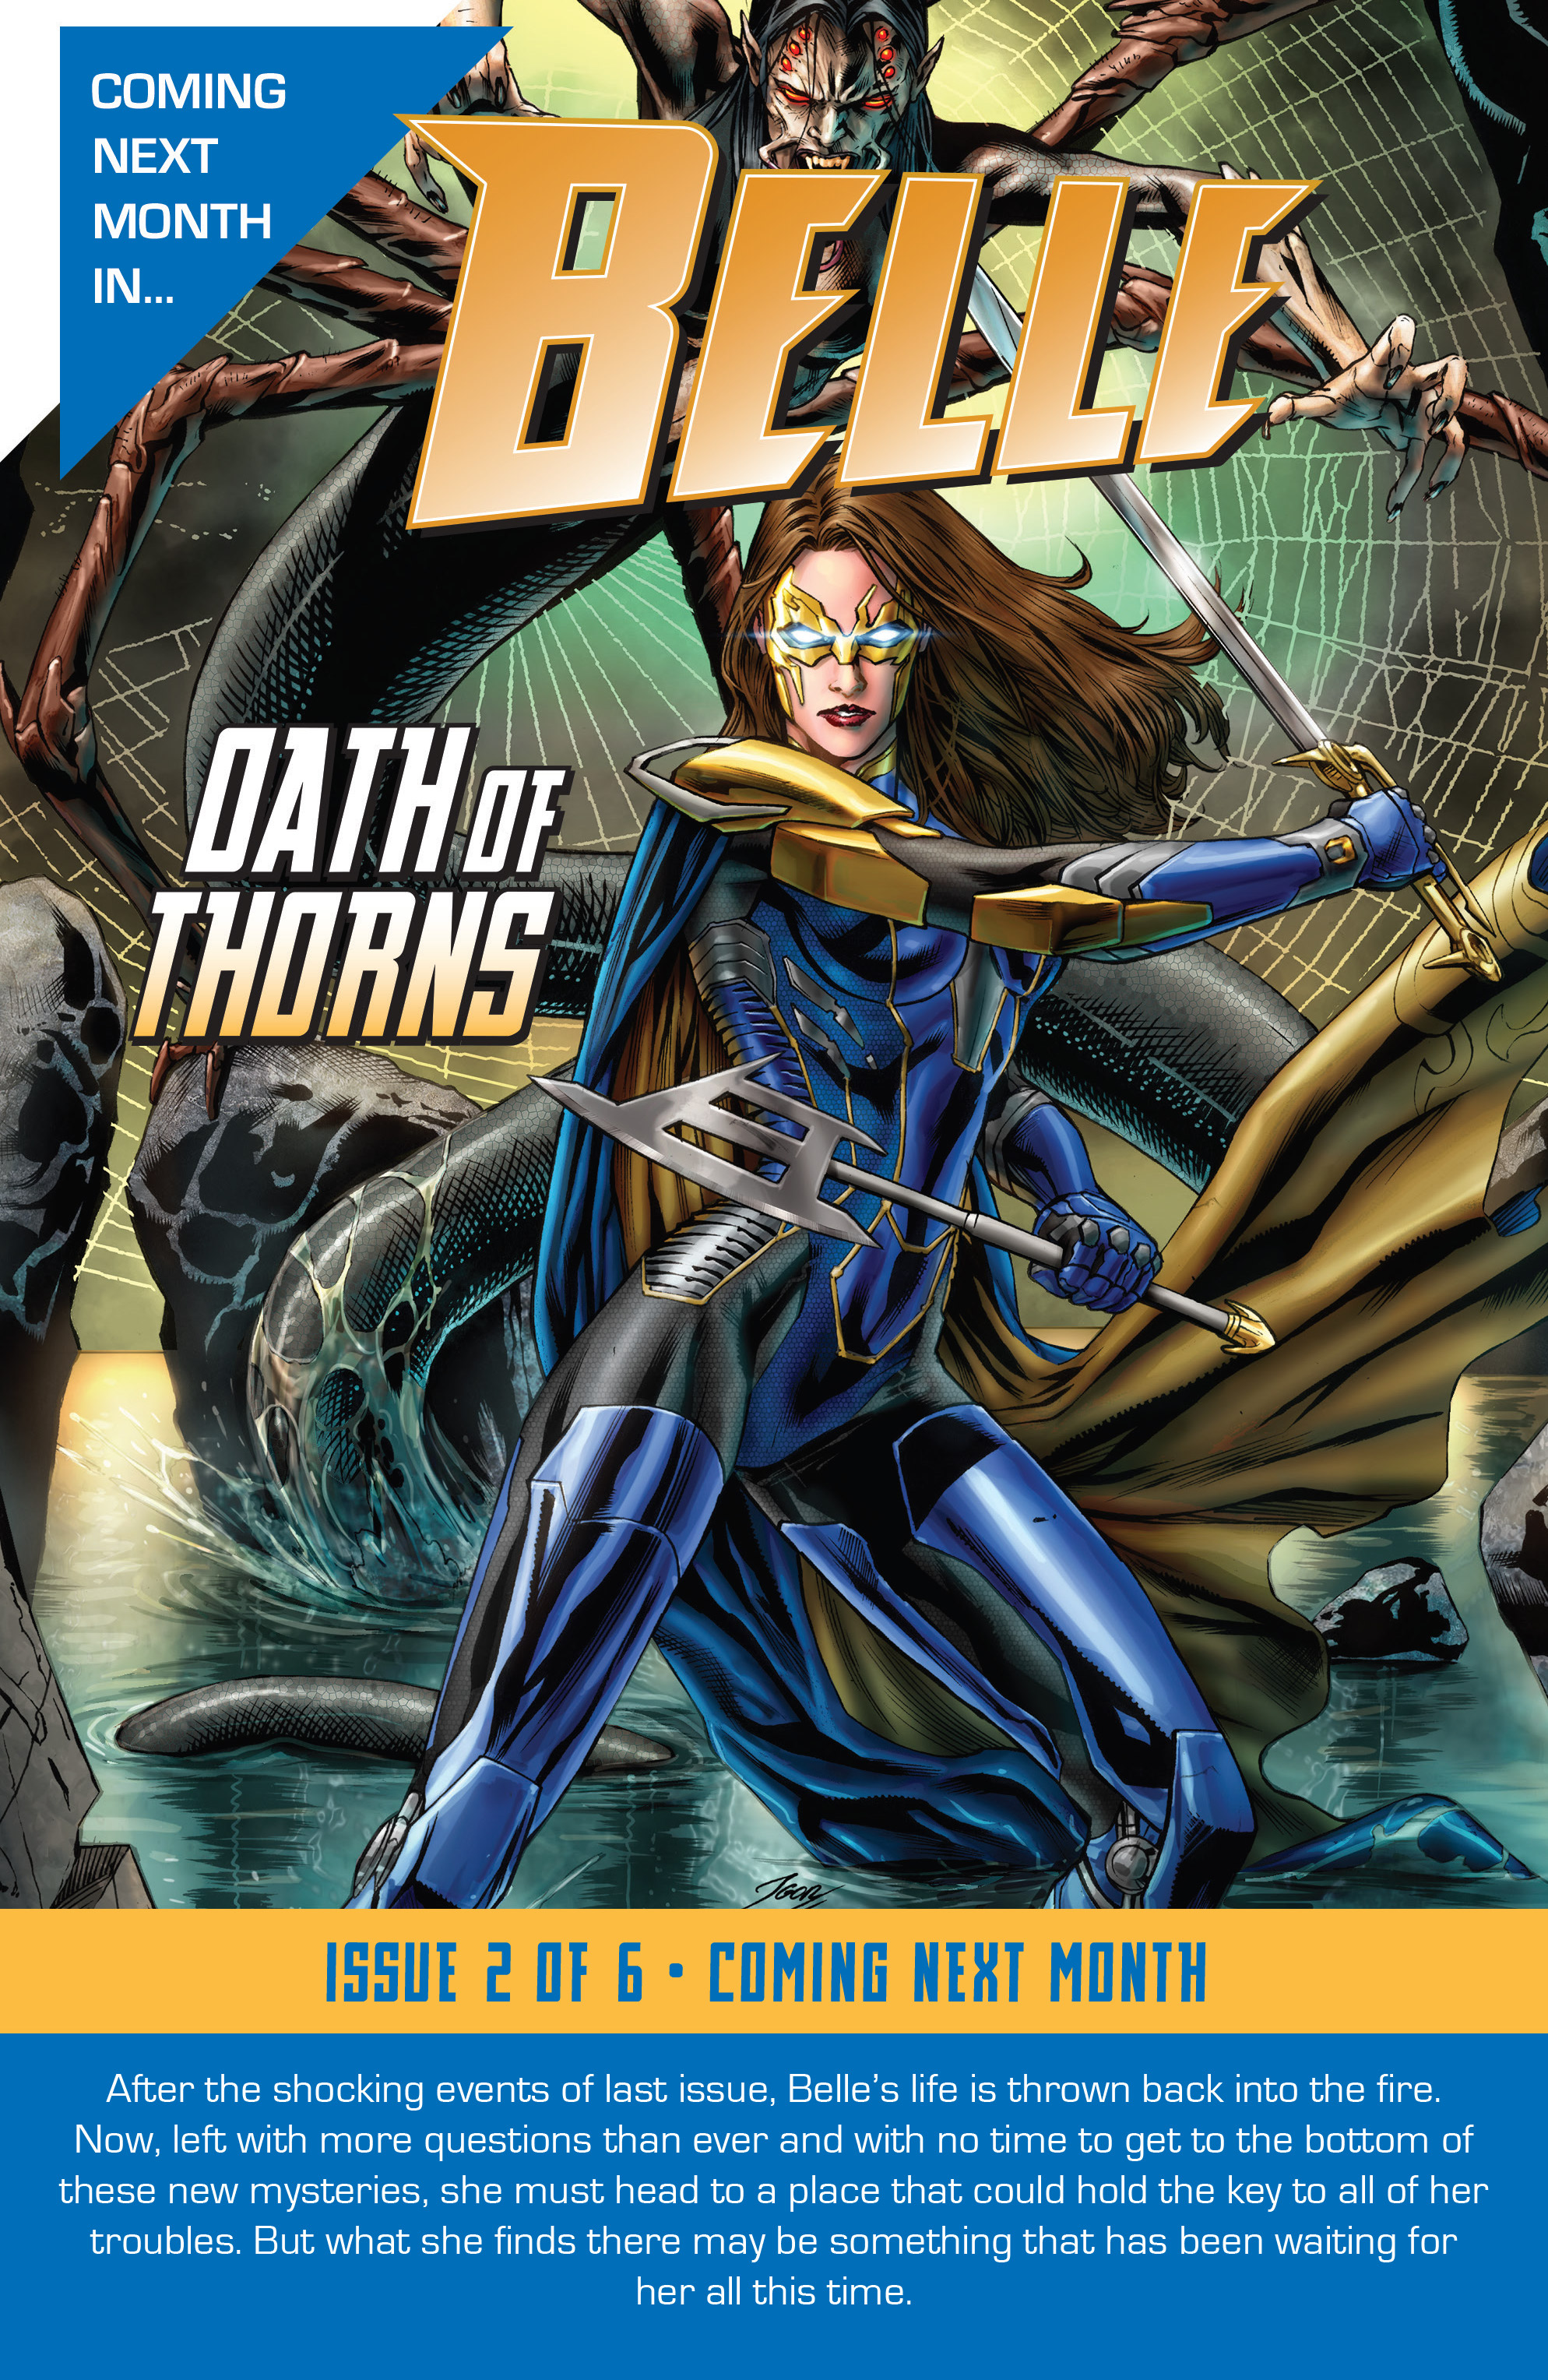 Read online Belle: Oath of Thorns comic -  Issue #1 - 25